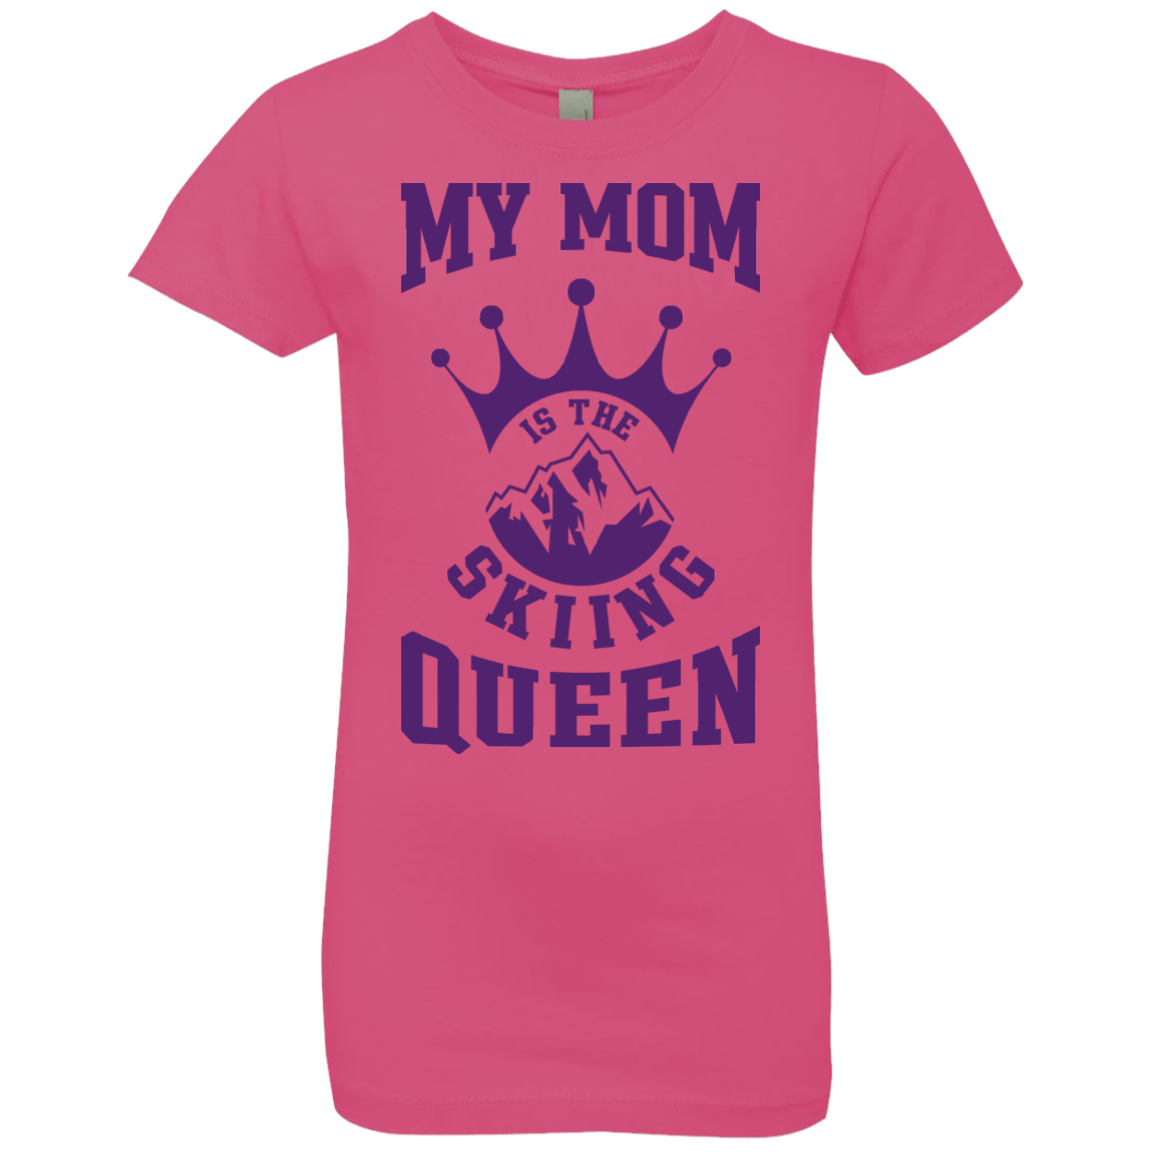 My Mom Is The Skiing Queen Purple Youth Next Level Girls' Princess T-Shirt - Powderaddicts